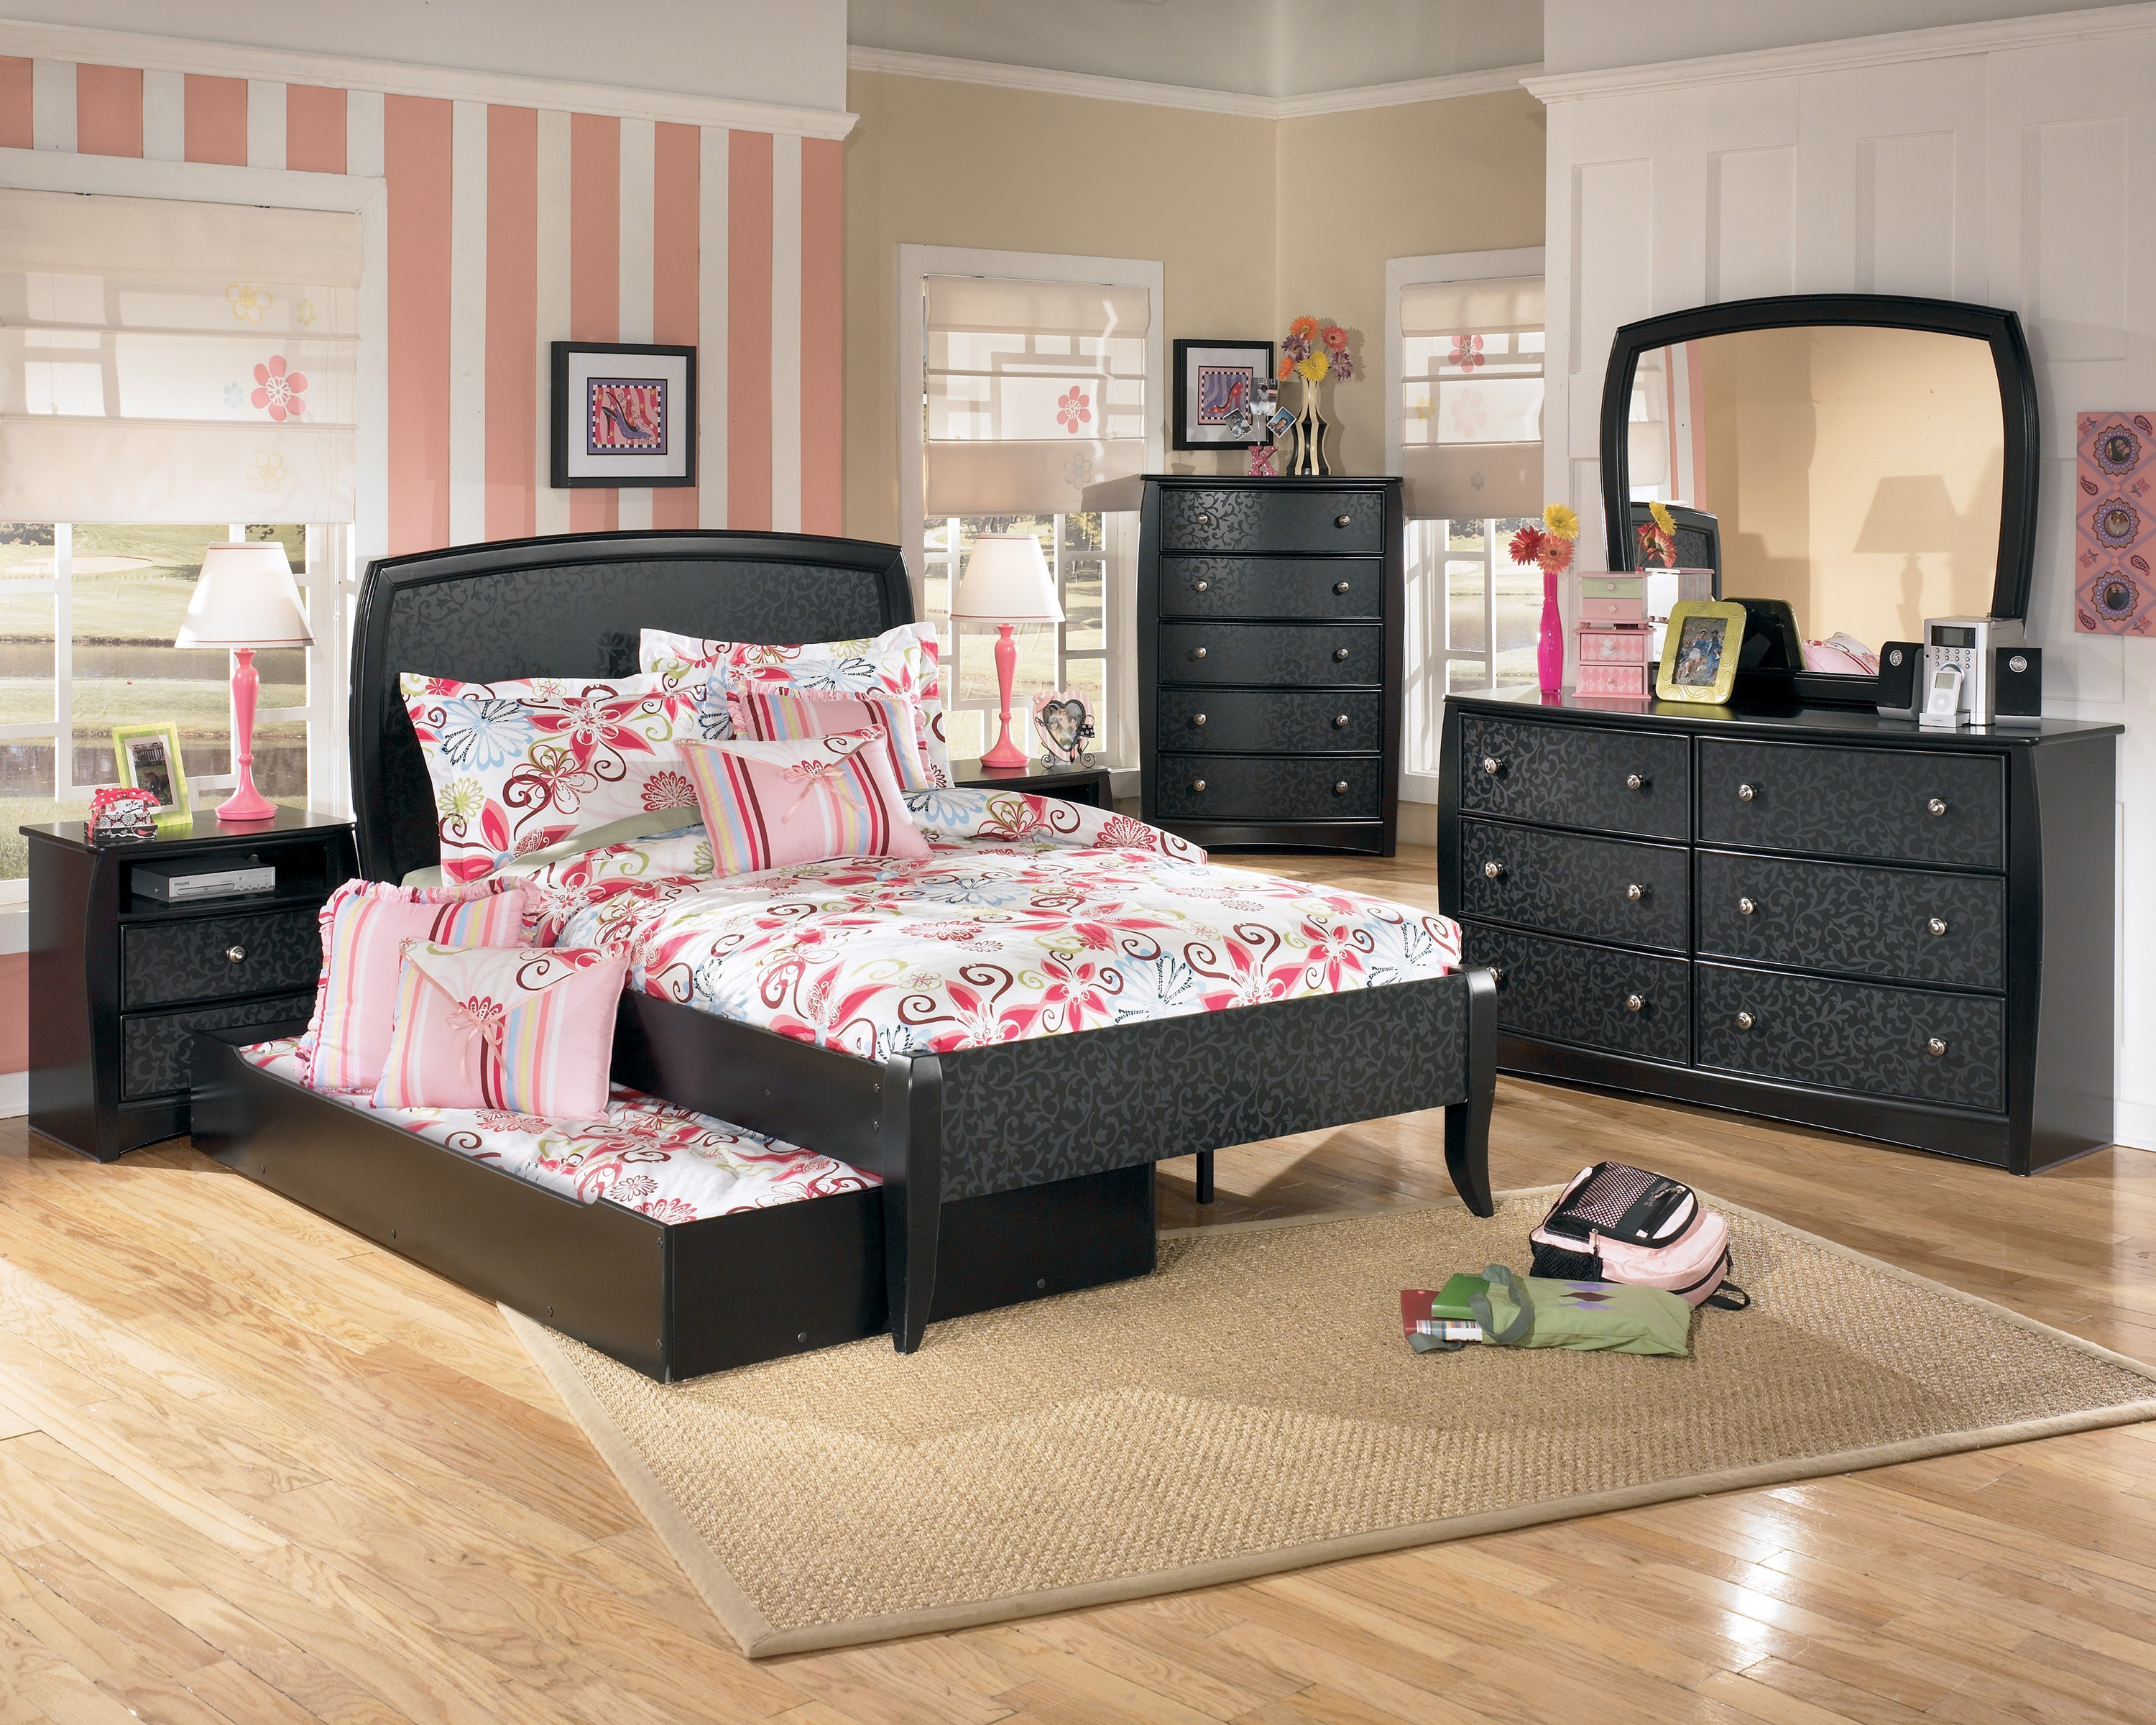 Astonishing Bedroom Furniture For Guys Storage And Full Boy Chair with measurements 3000 X 2400